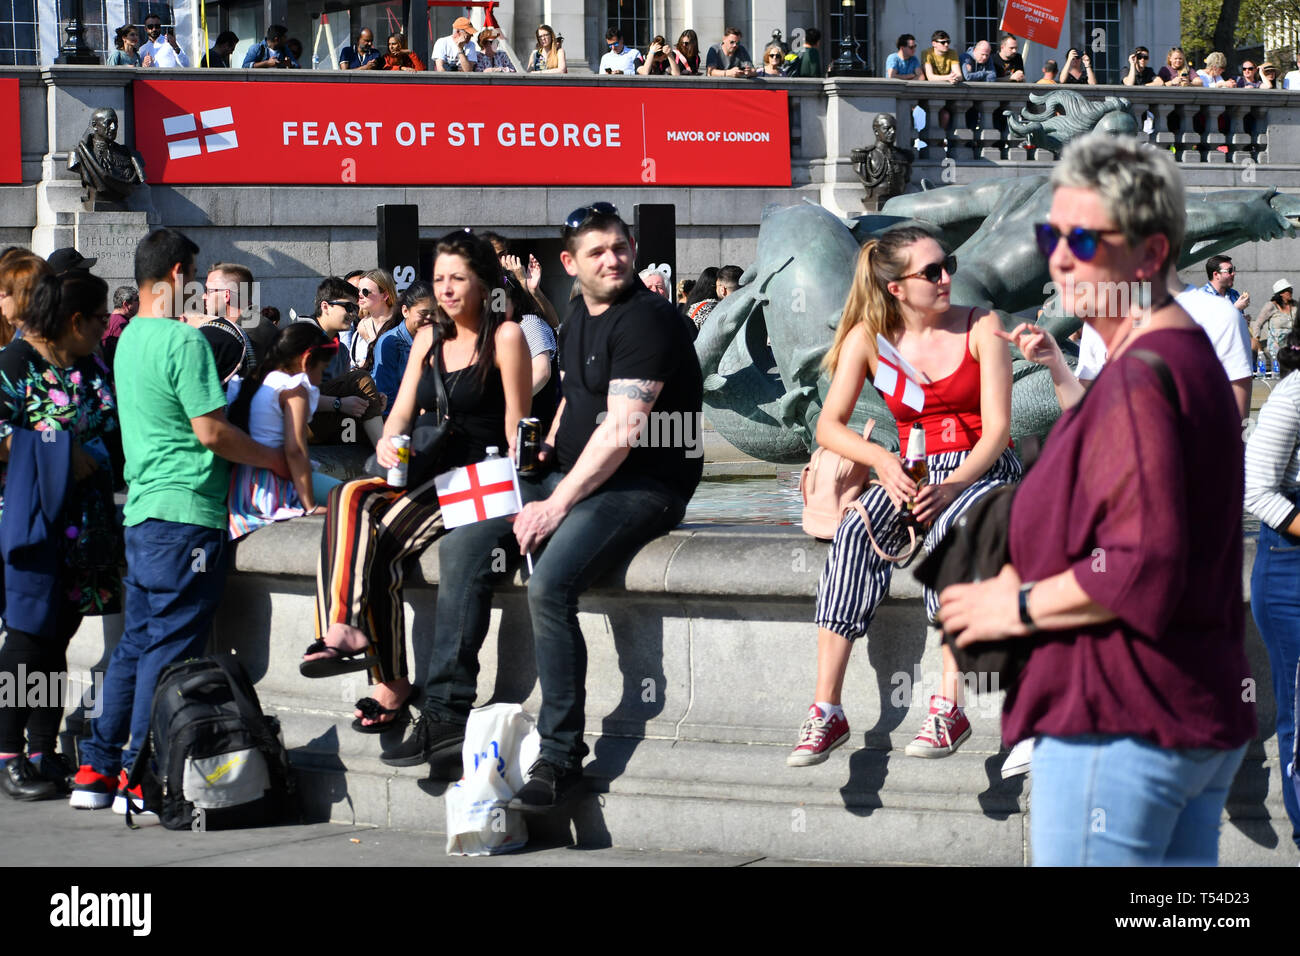 London, UK. 20th April, 2019.London, UK. 20th April, 2019. .Feast of St George to celebrate English culture with music and English food stalls in Trafalgar Square on 20 April 2019, London, UK. Credit: Picture Capital/Alamy Live News Credit: Picture Capital/Alamy Live News Stock Photo